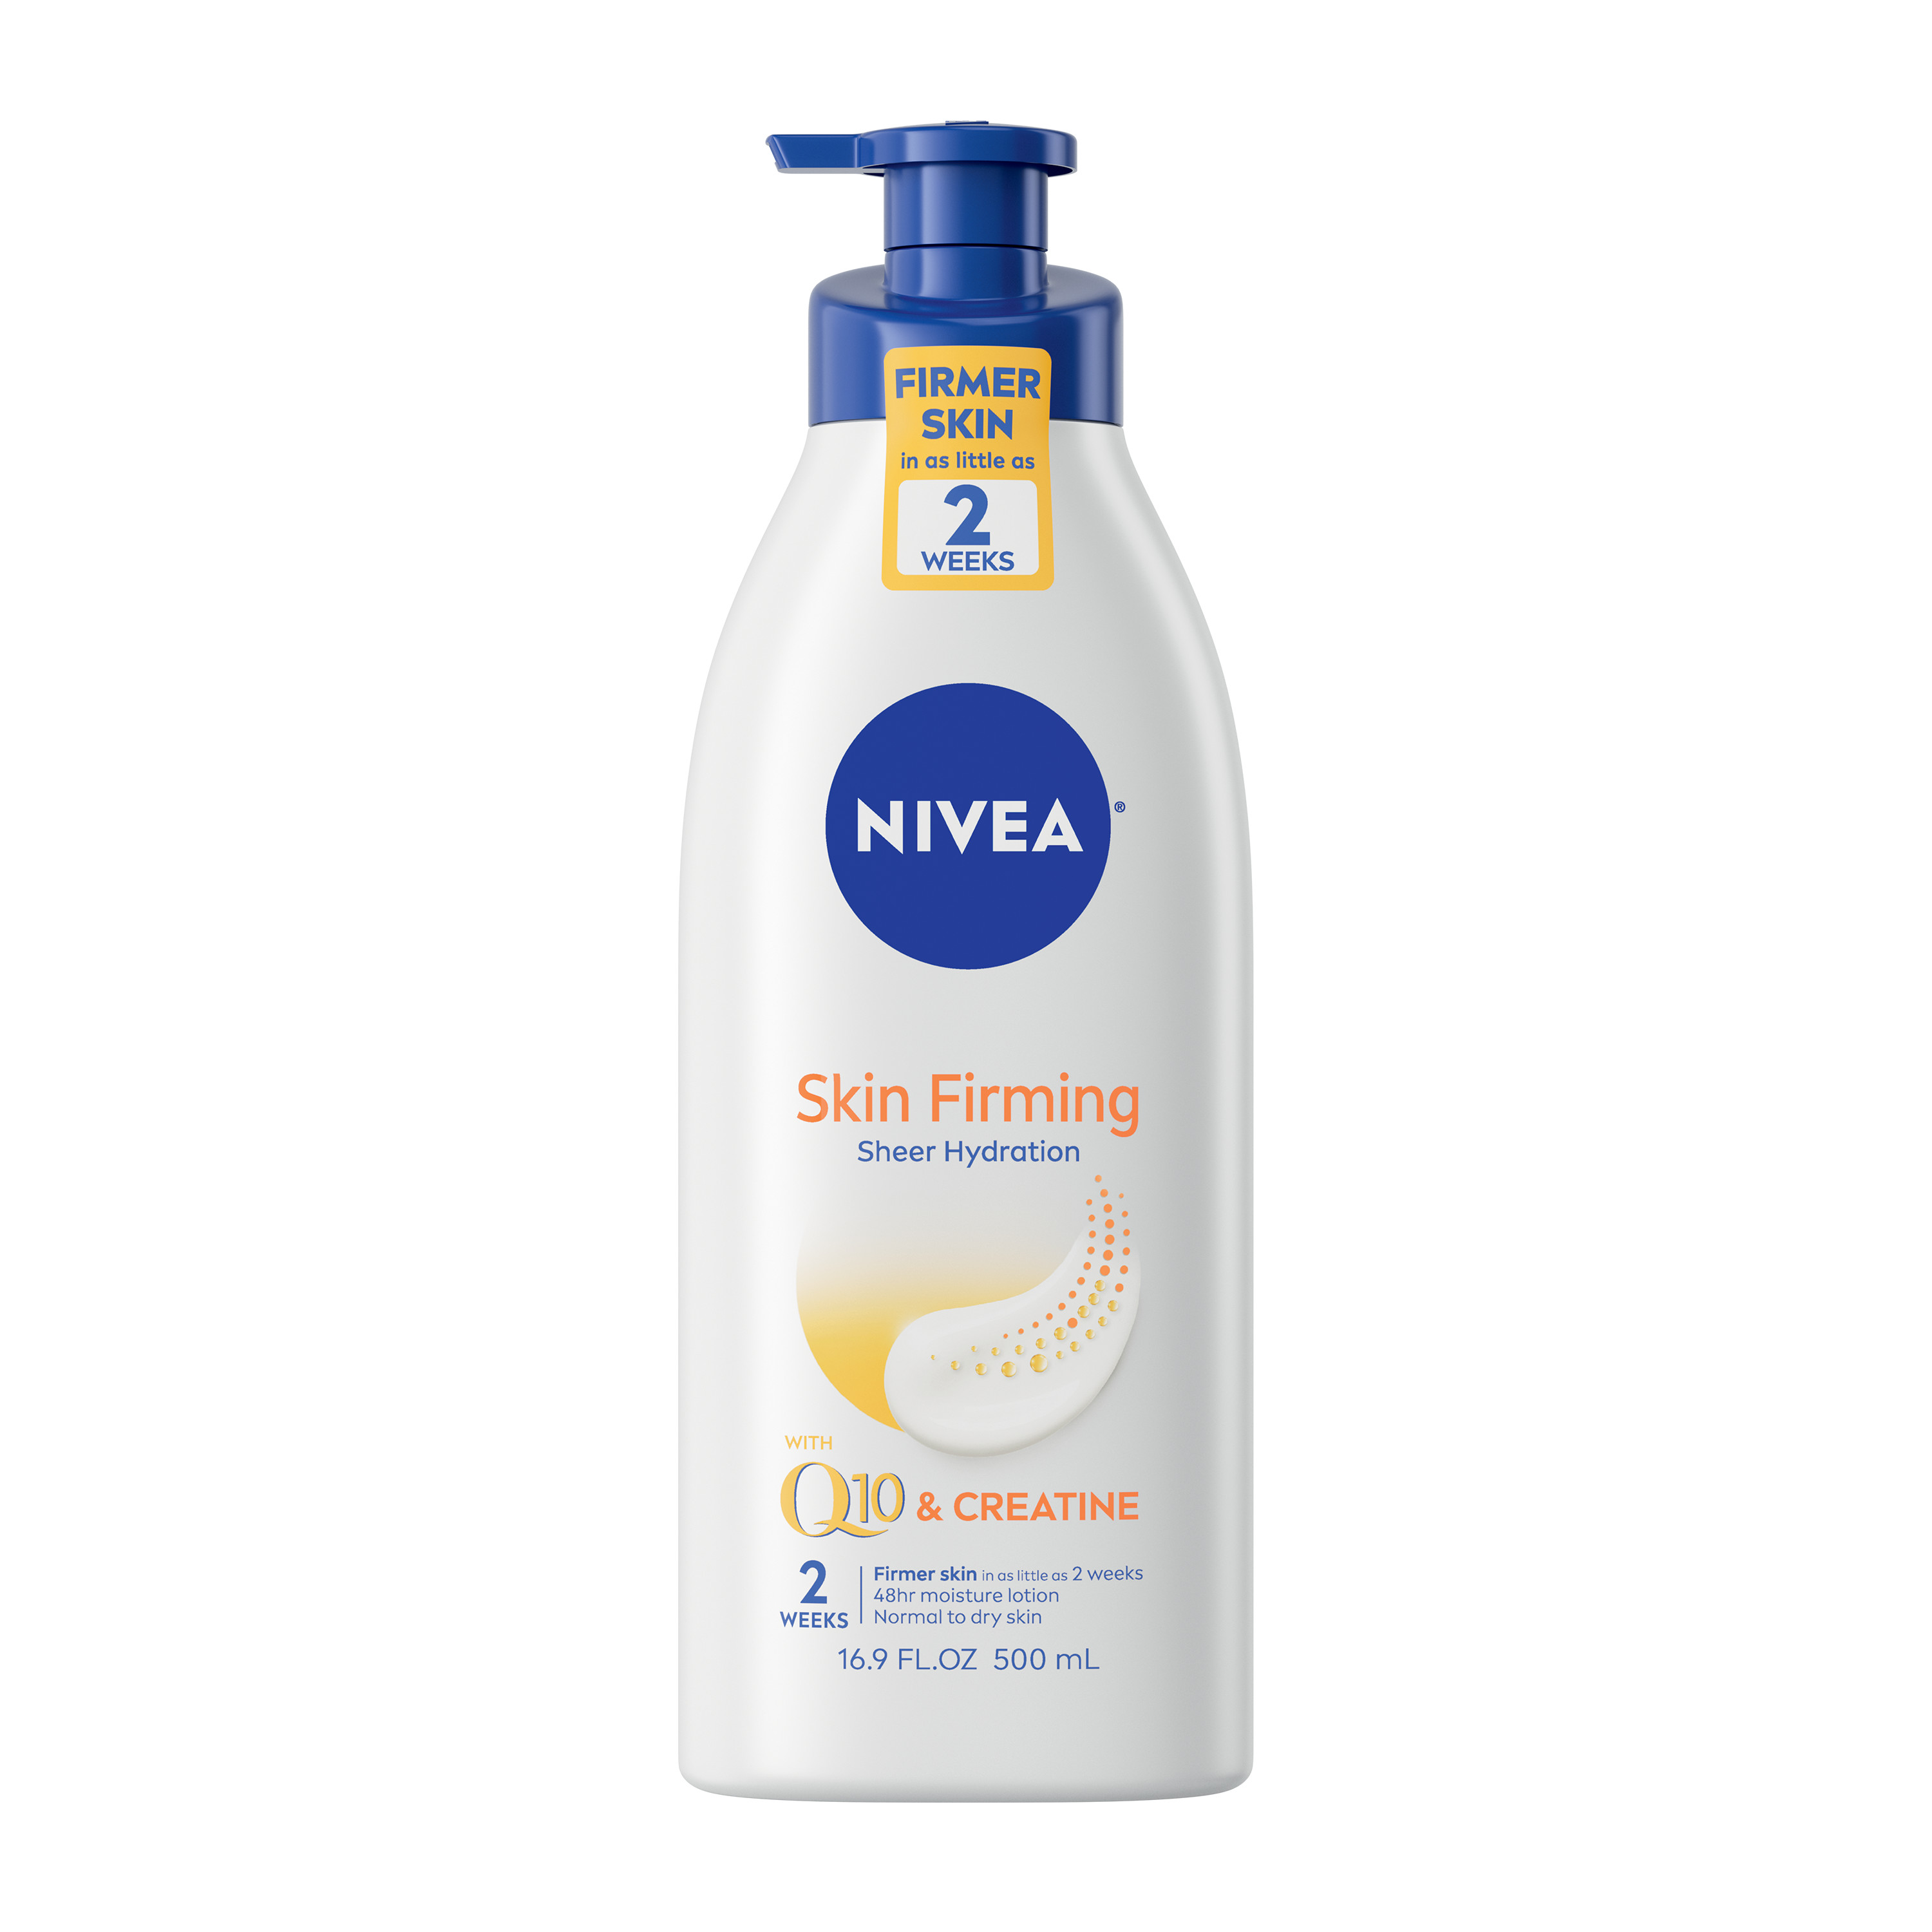 NIVEA Skin Firming Hydration Body Lotion with Q10 and Shea Butter, 16.9 Fl Oz Pump Bottle - image 2 of 12